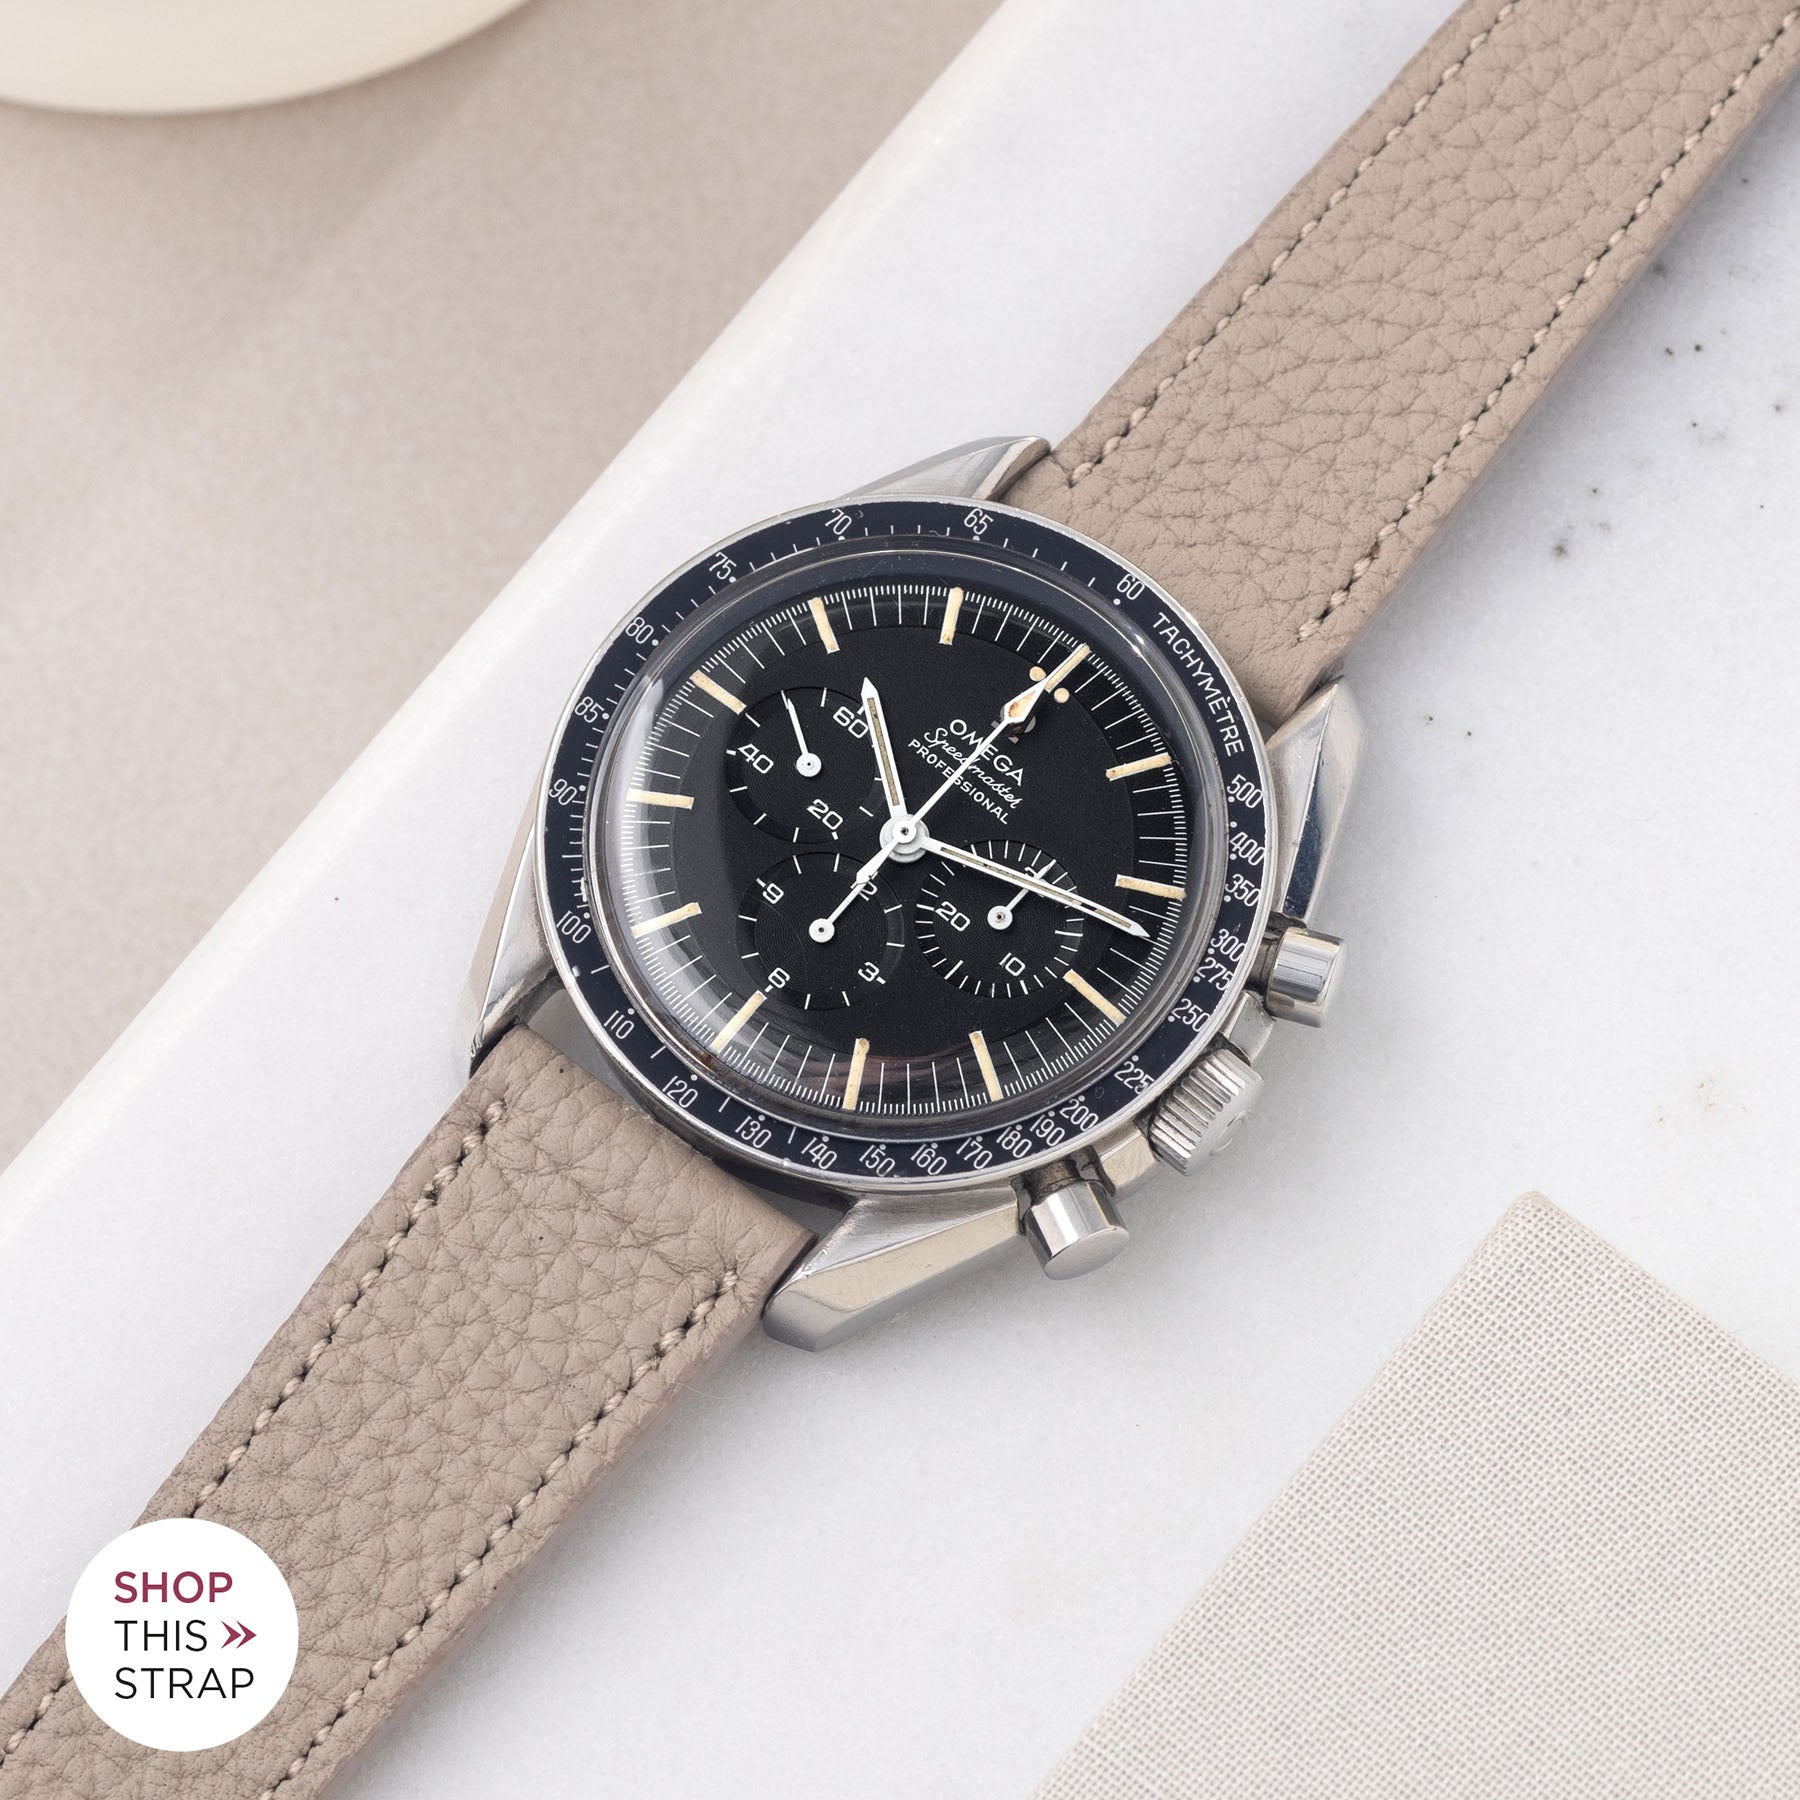 Bulang and Sons_Strapguide_Omega Speedmaster Professional_Togo Light Grey Tonal Leather Watch Strap